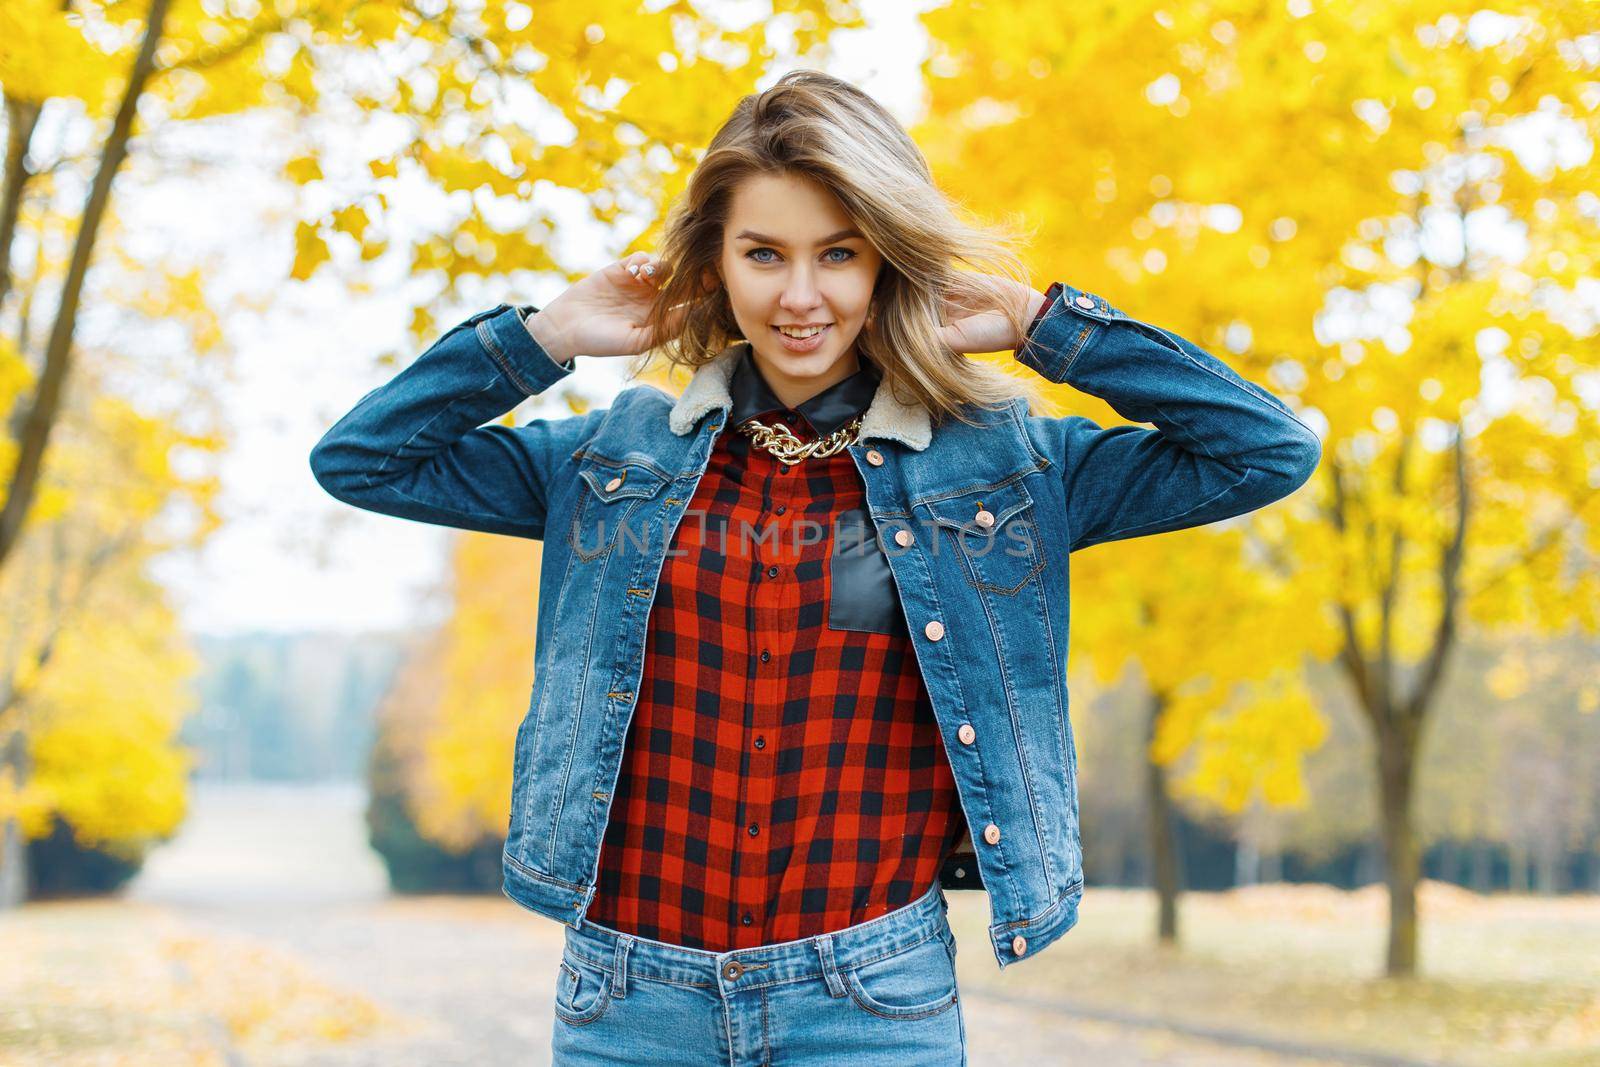 Young woman in jeans clothes in the autumn park.